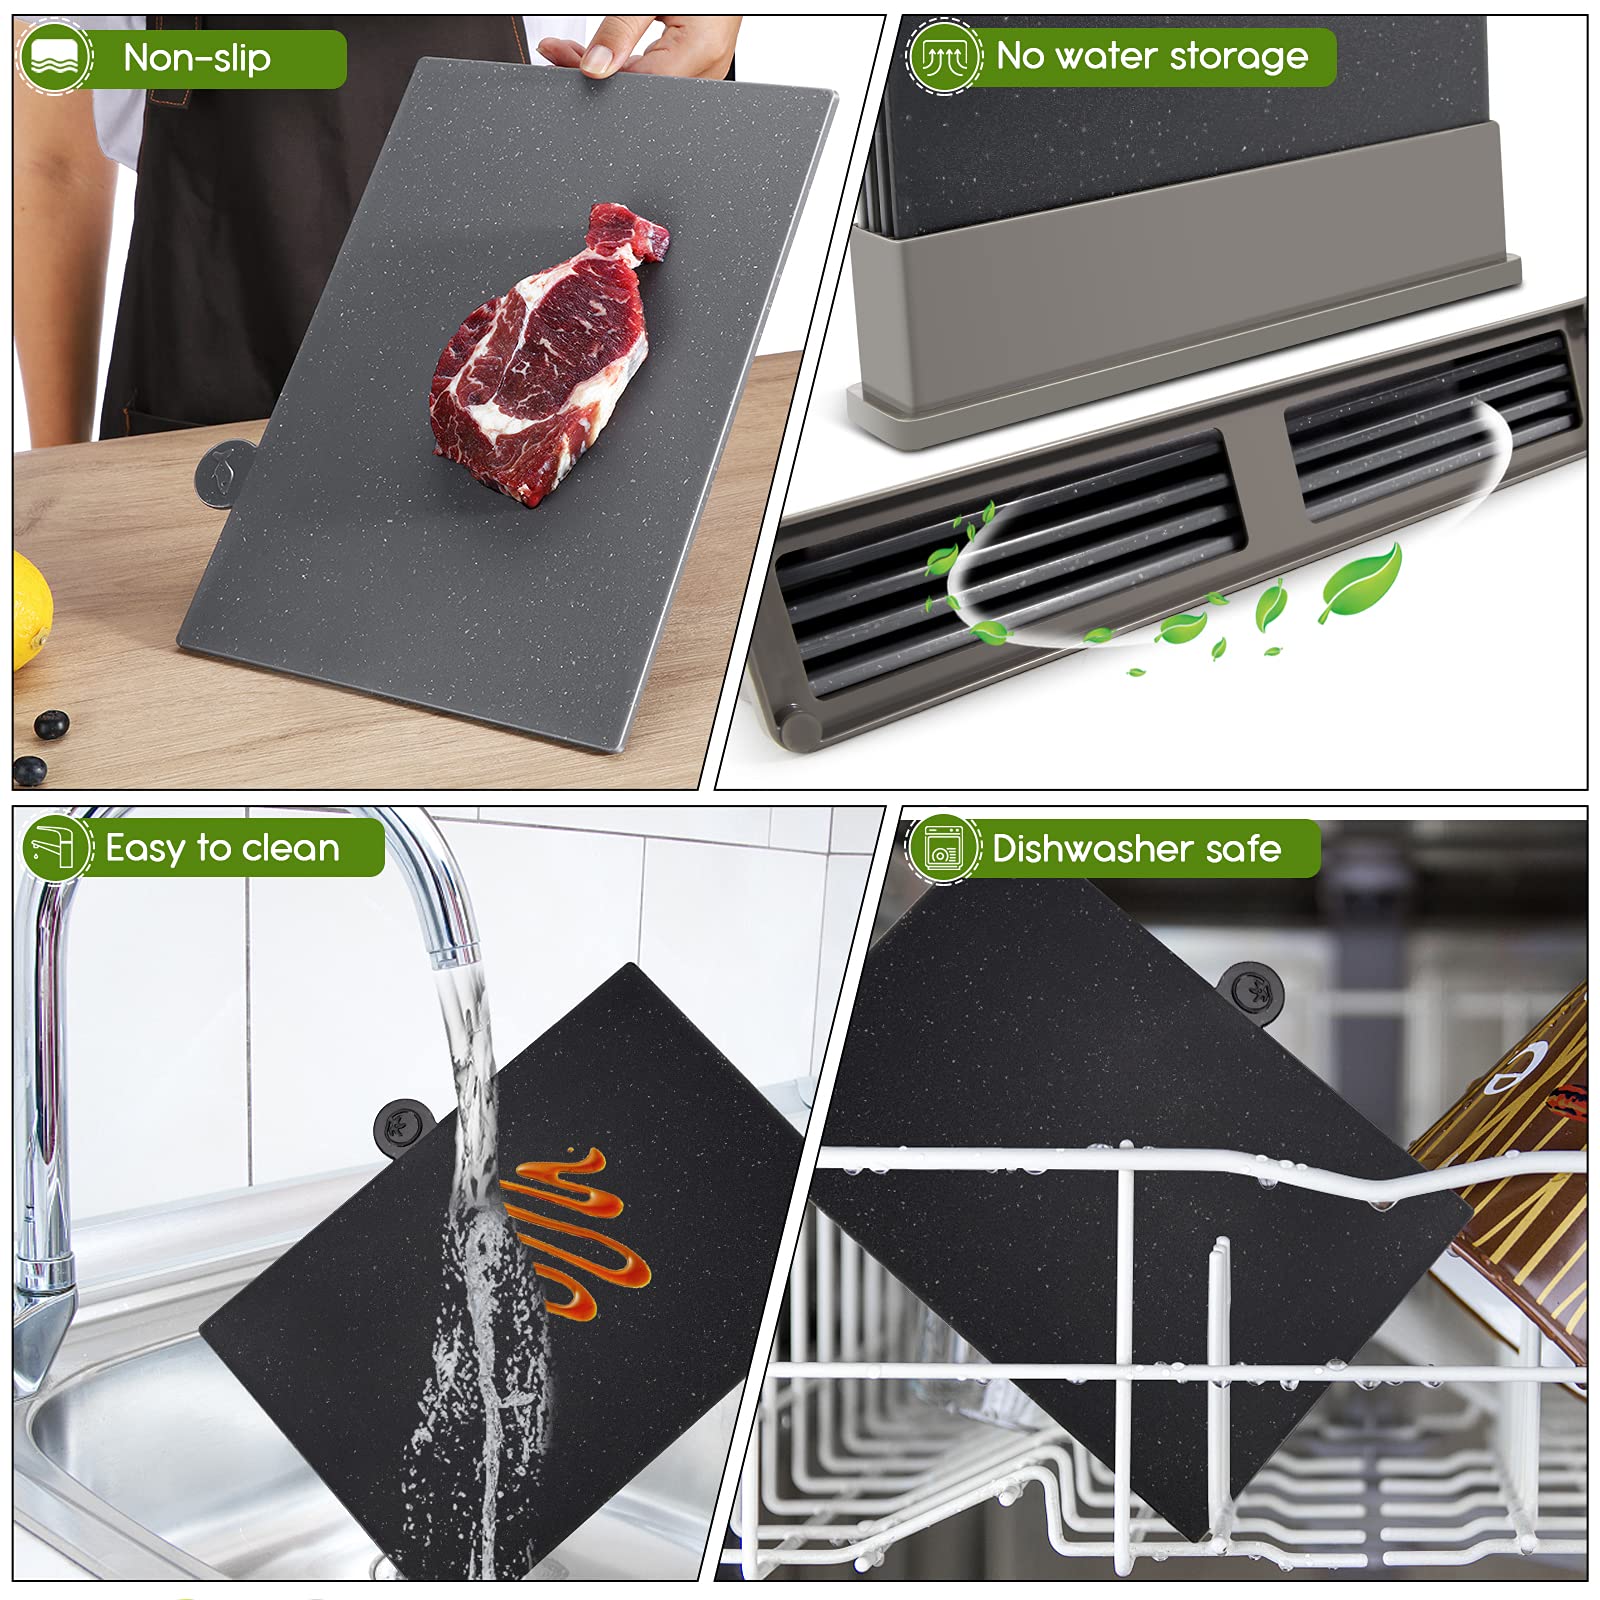 Index Cutting Board Set with Holder,Plastic Chopping Board Set of 4 with Draining Rack,Food Icon,Cutting Boards Dishwasher Safe,BPA Free,Easy to Storage for Kitchen,Send 1 Scissors(12.6" x 8.6")